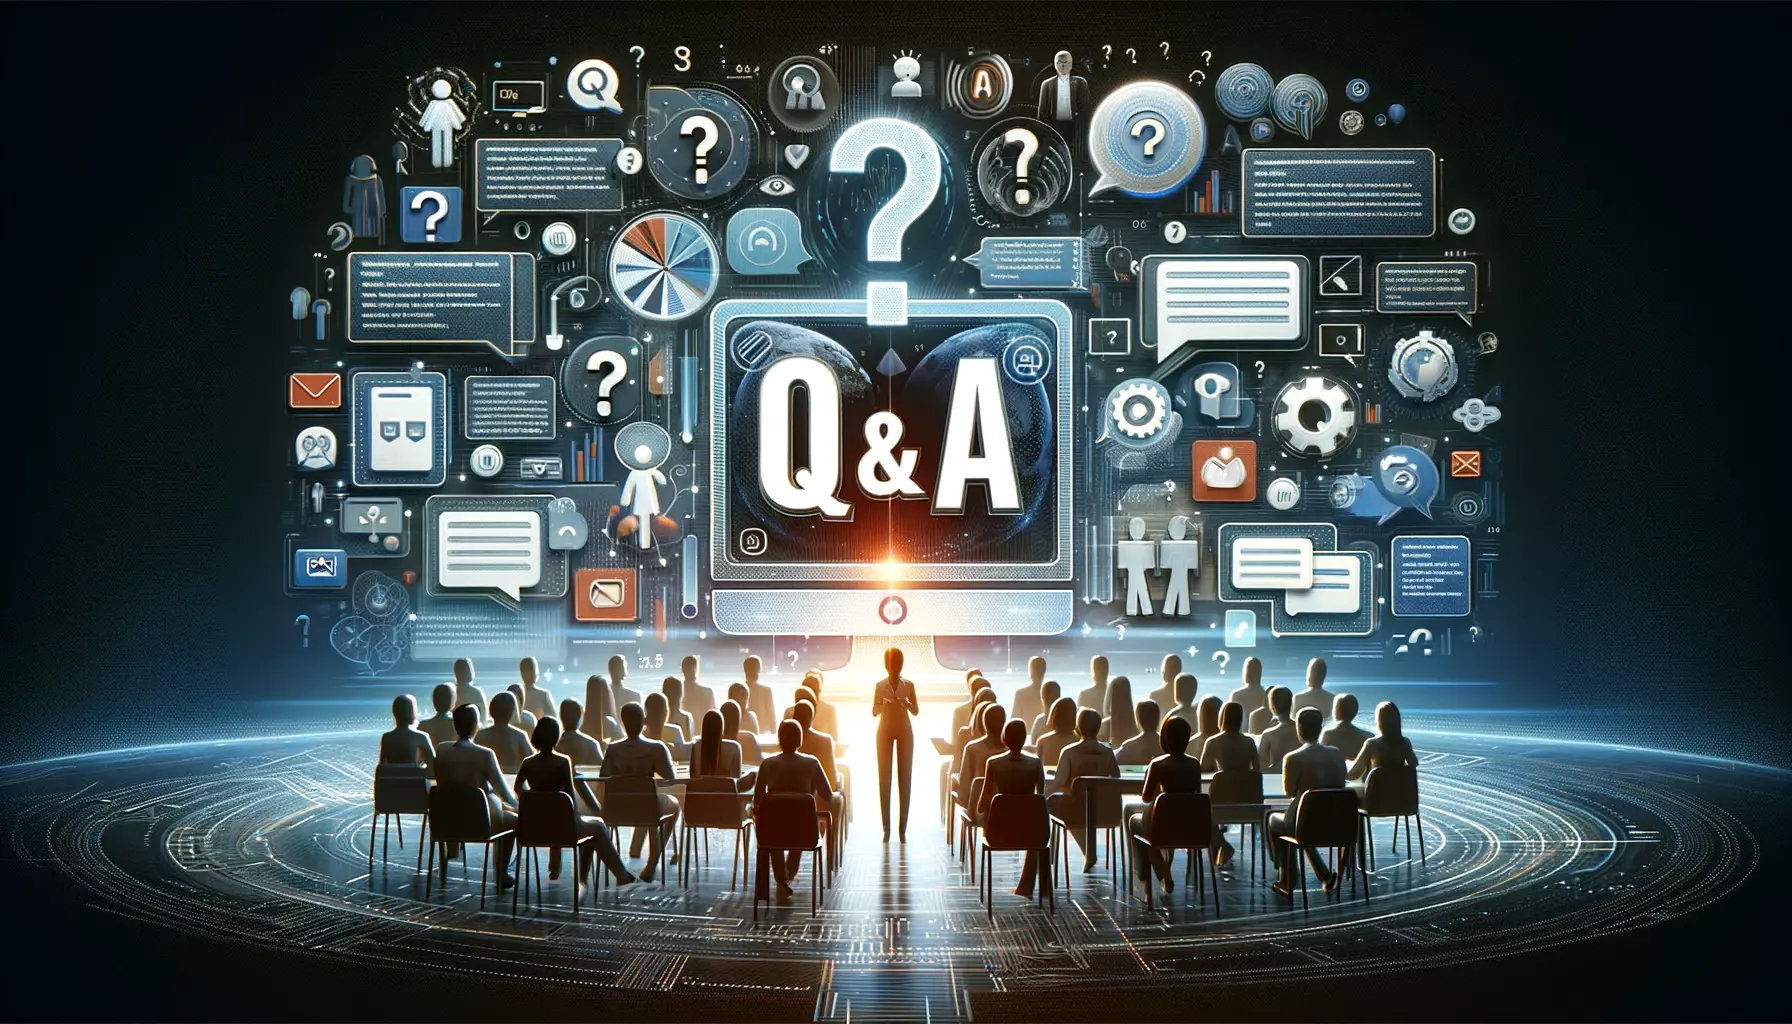 Q & A | We Answer your IT Questions | IT NEAR U